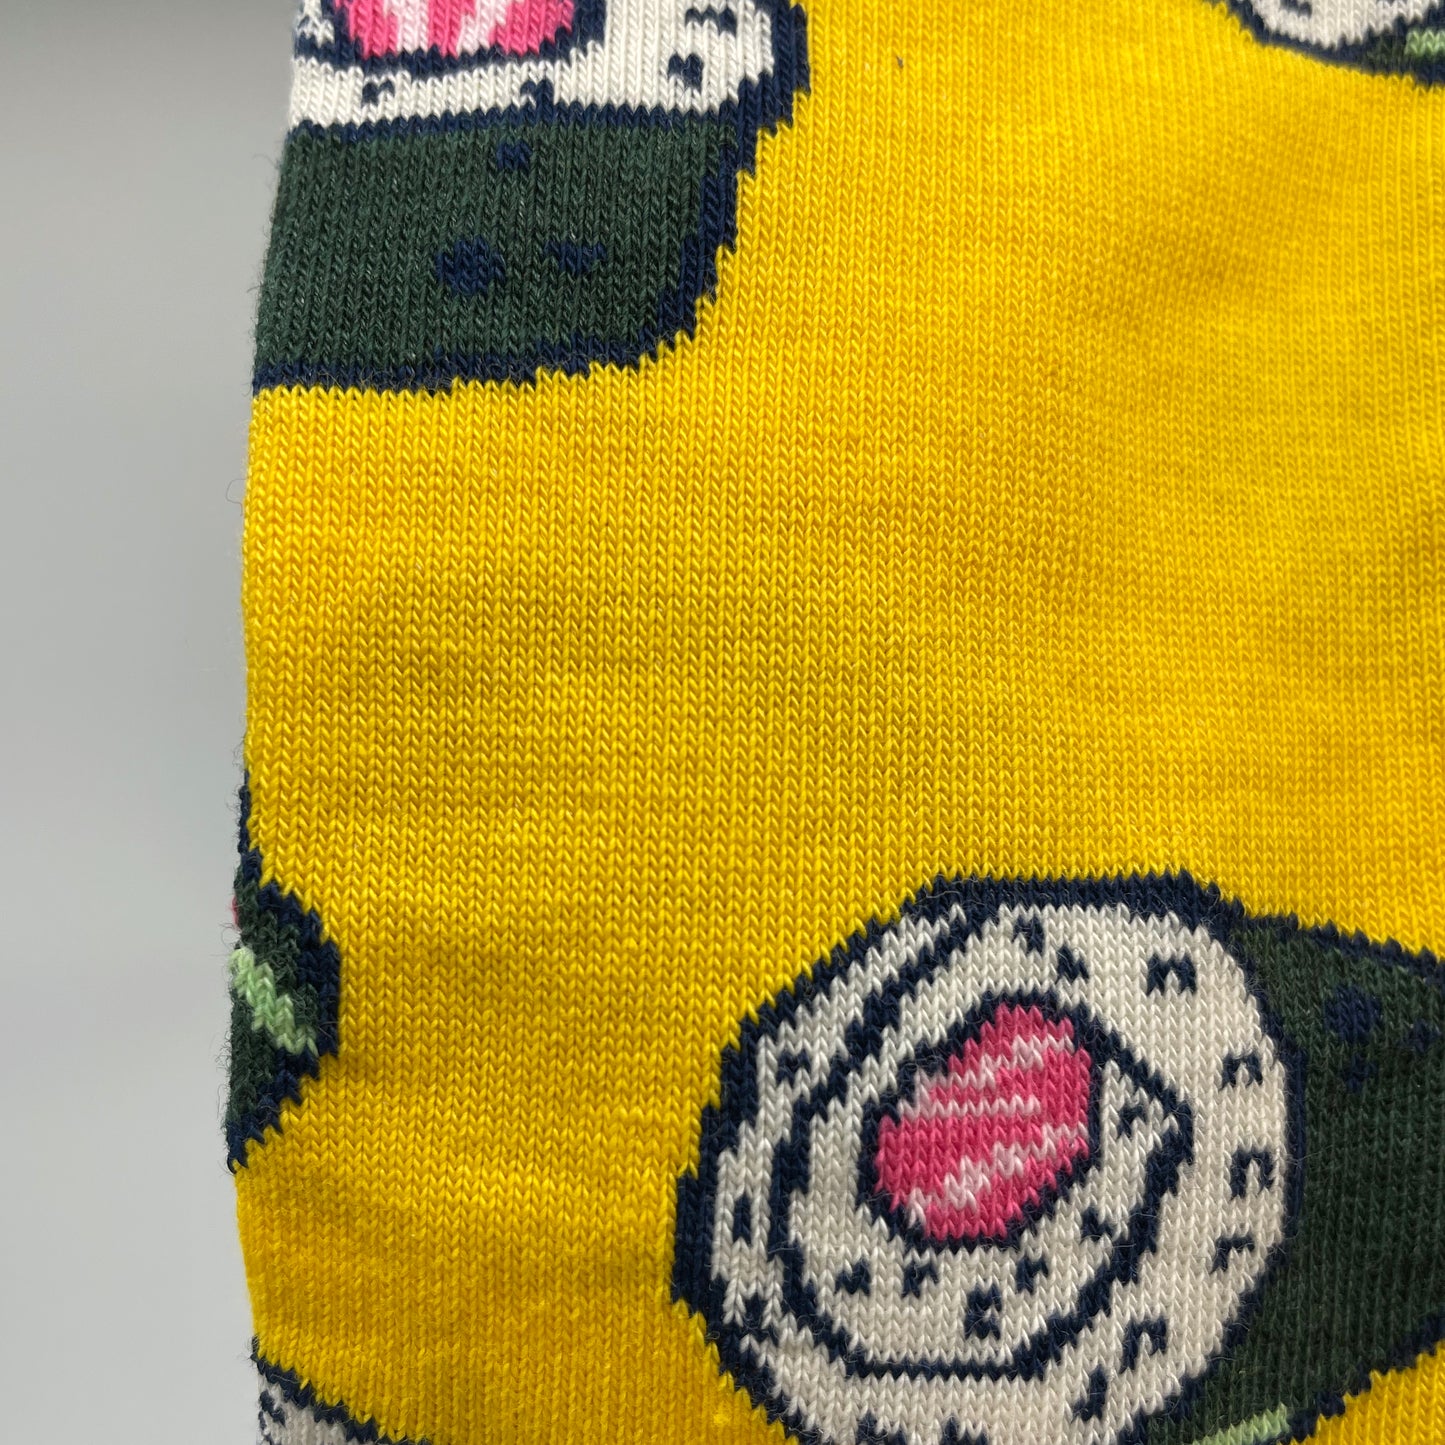 A close-up photo shows detail of a sushi roll pattern woven into a bright yellow organic cotton sock.